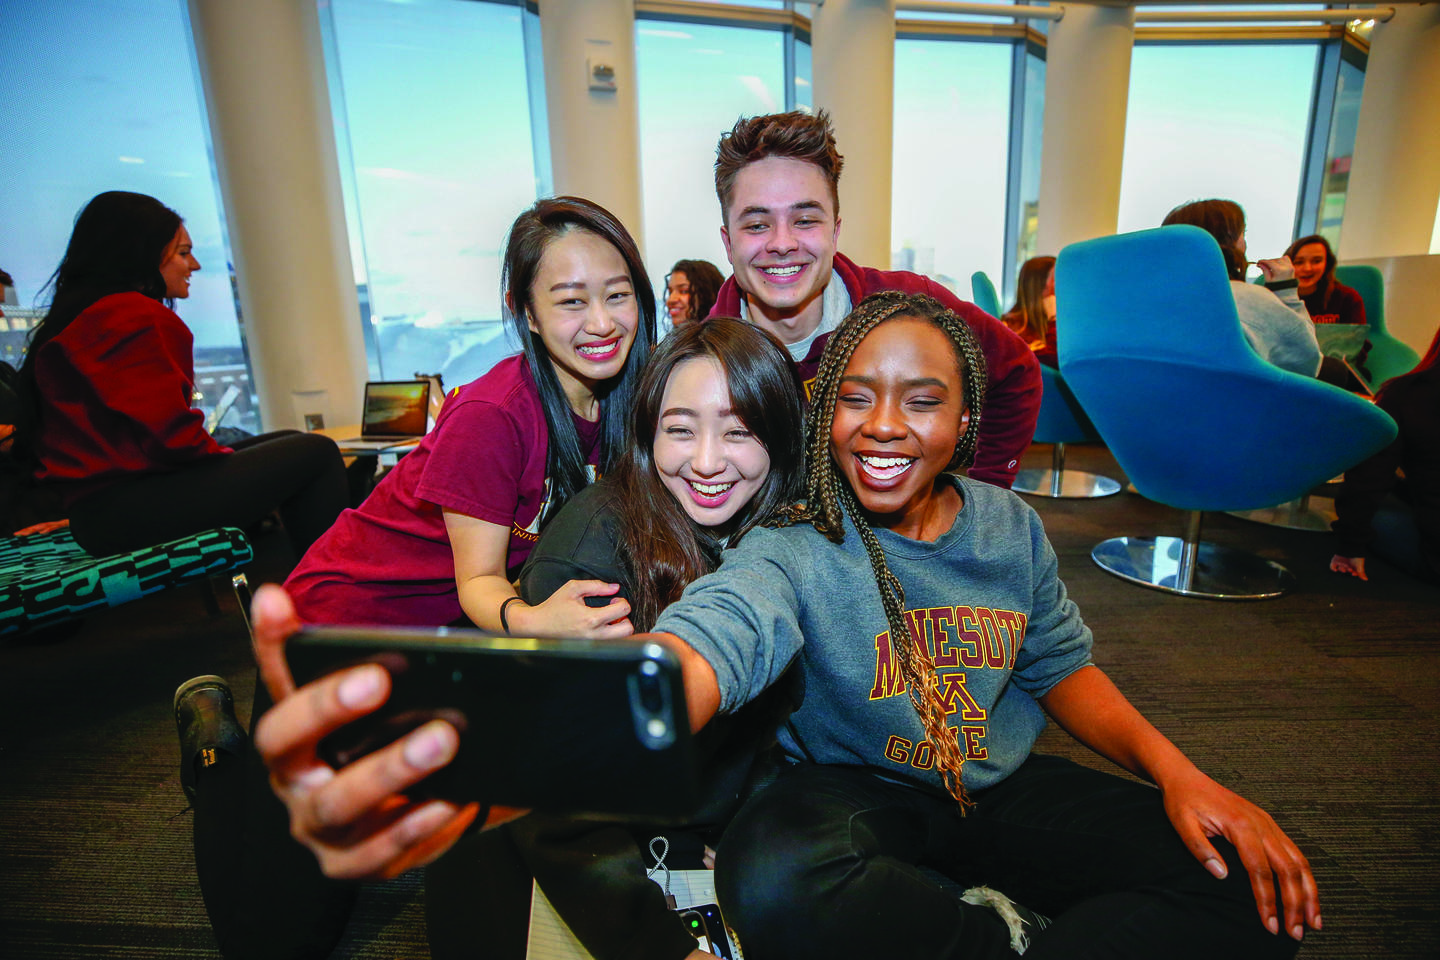 Four students standing together, taking a selfie